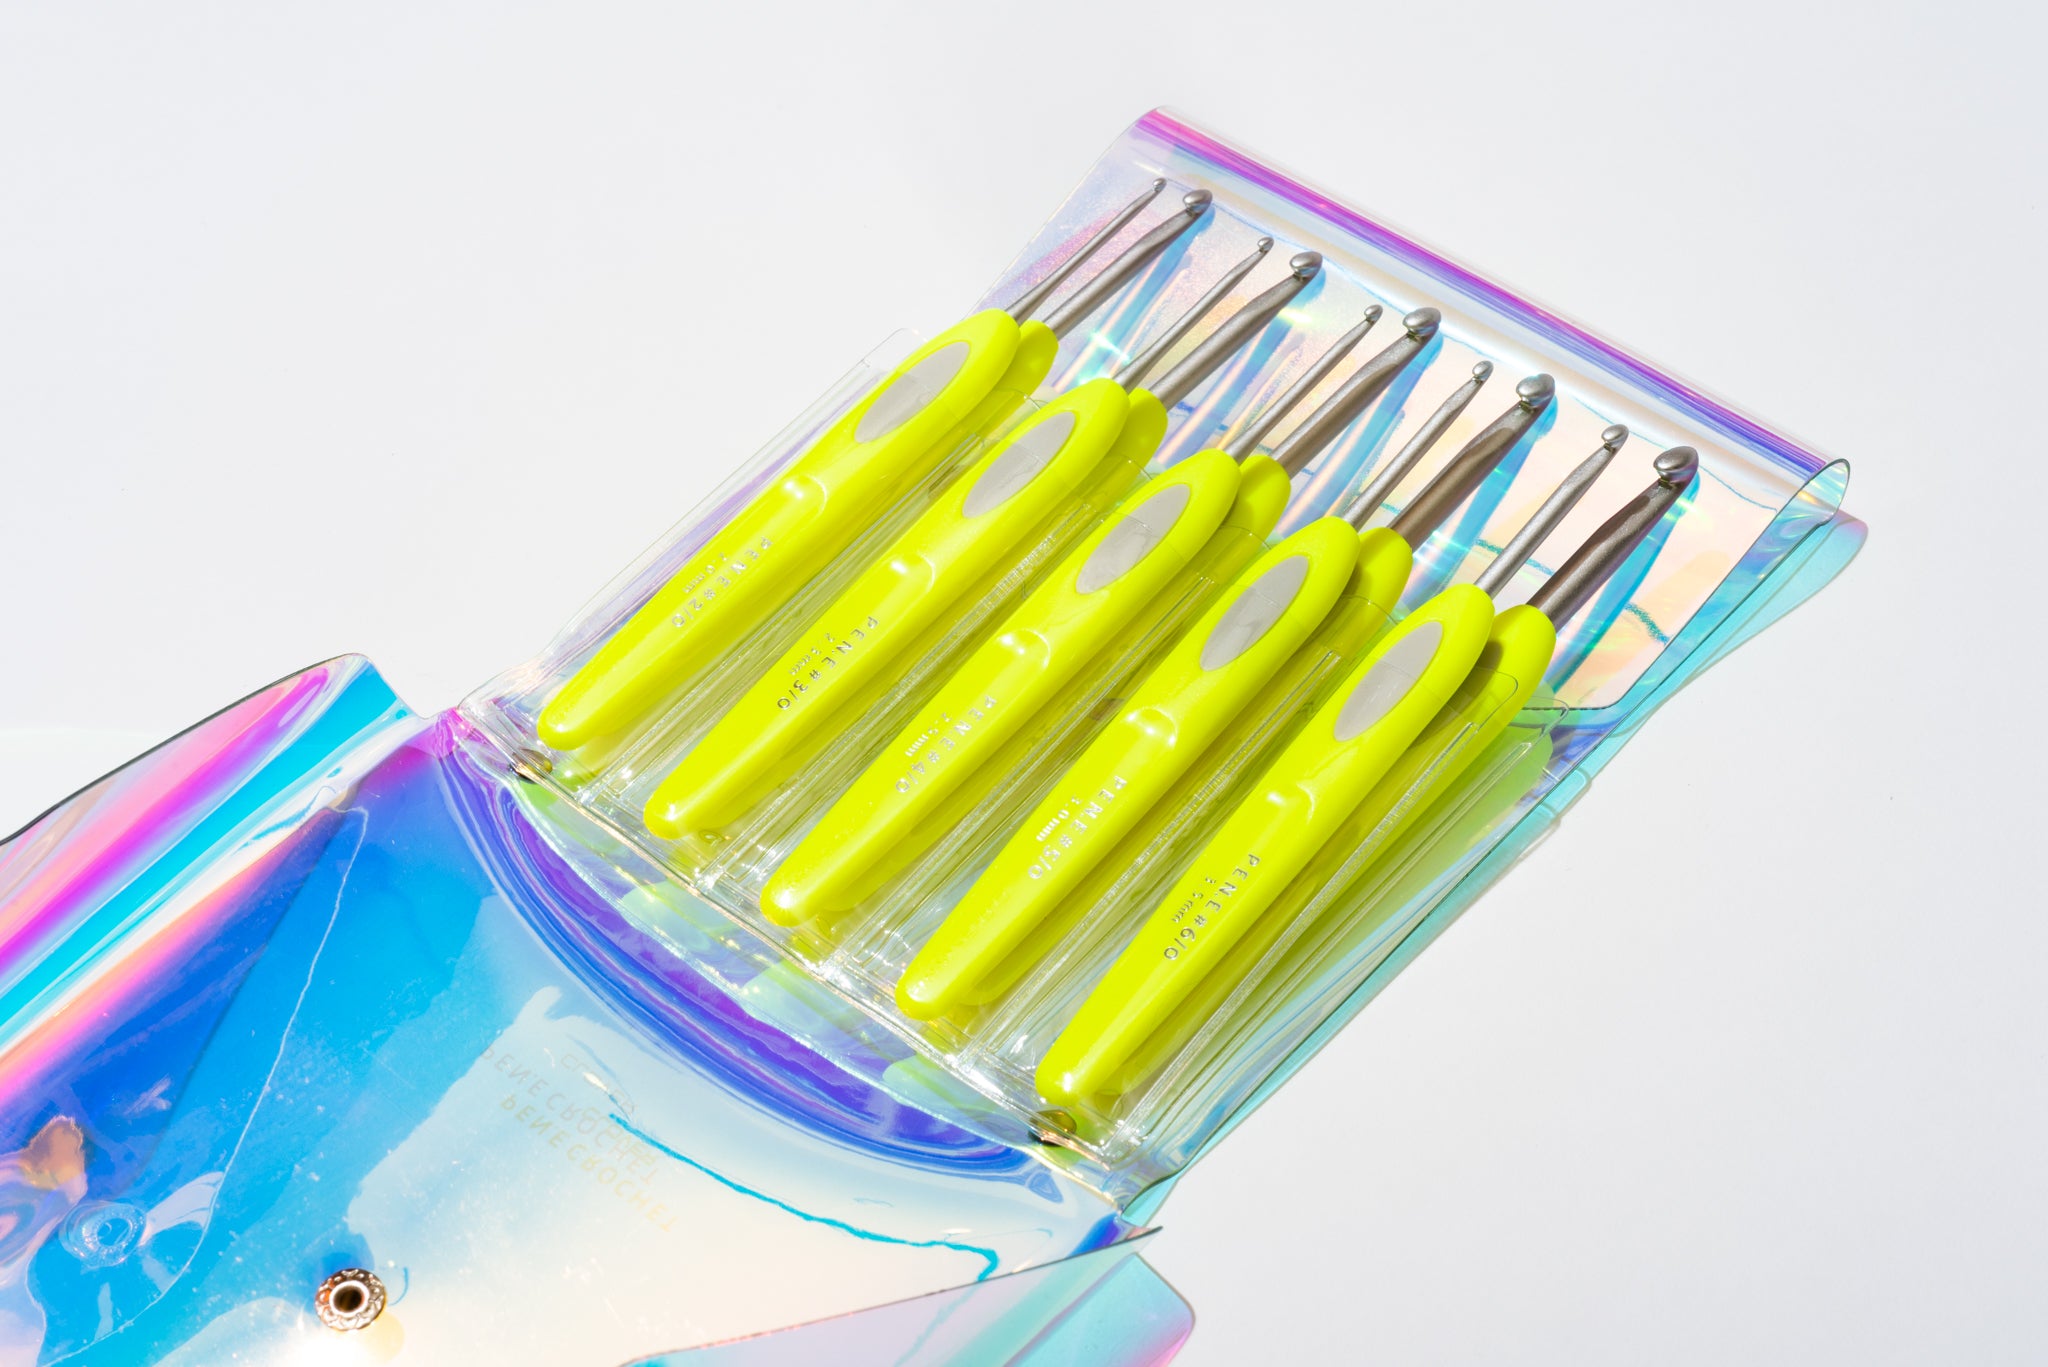 [LE][OOS]Limited Edition Clover PEN.E NeonYellow Soft Touch Crochet Hook Set